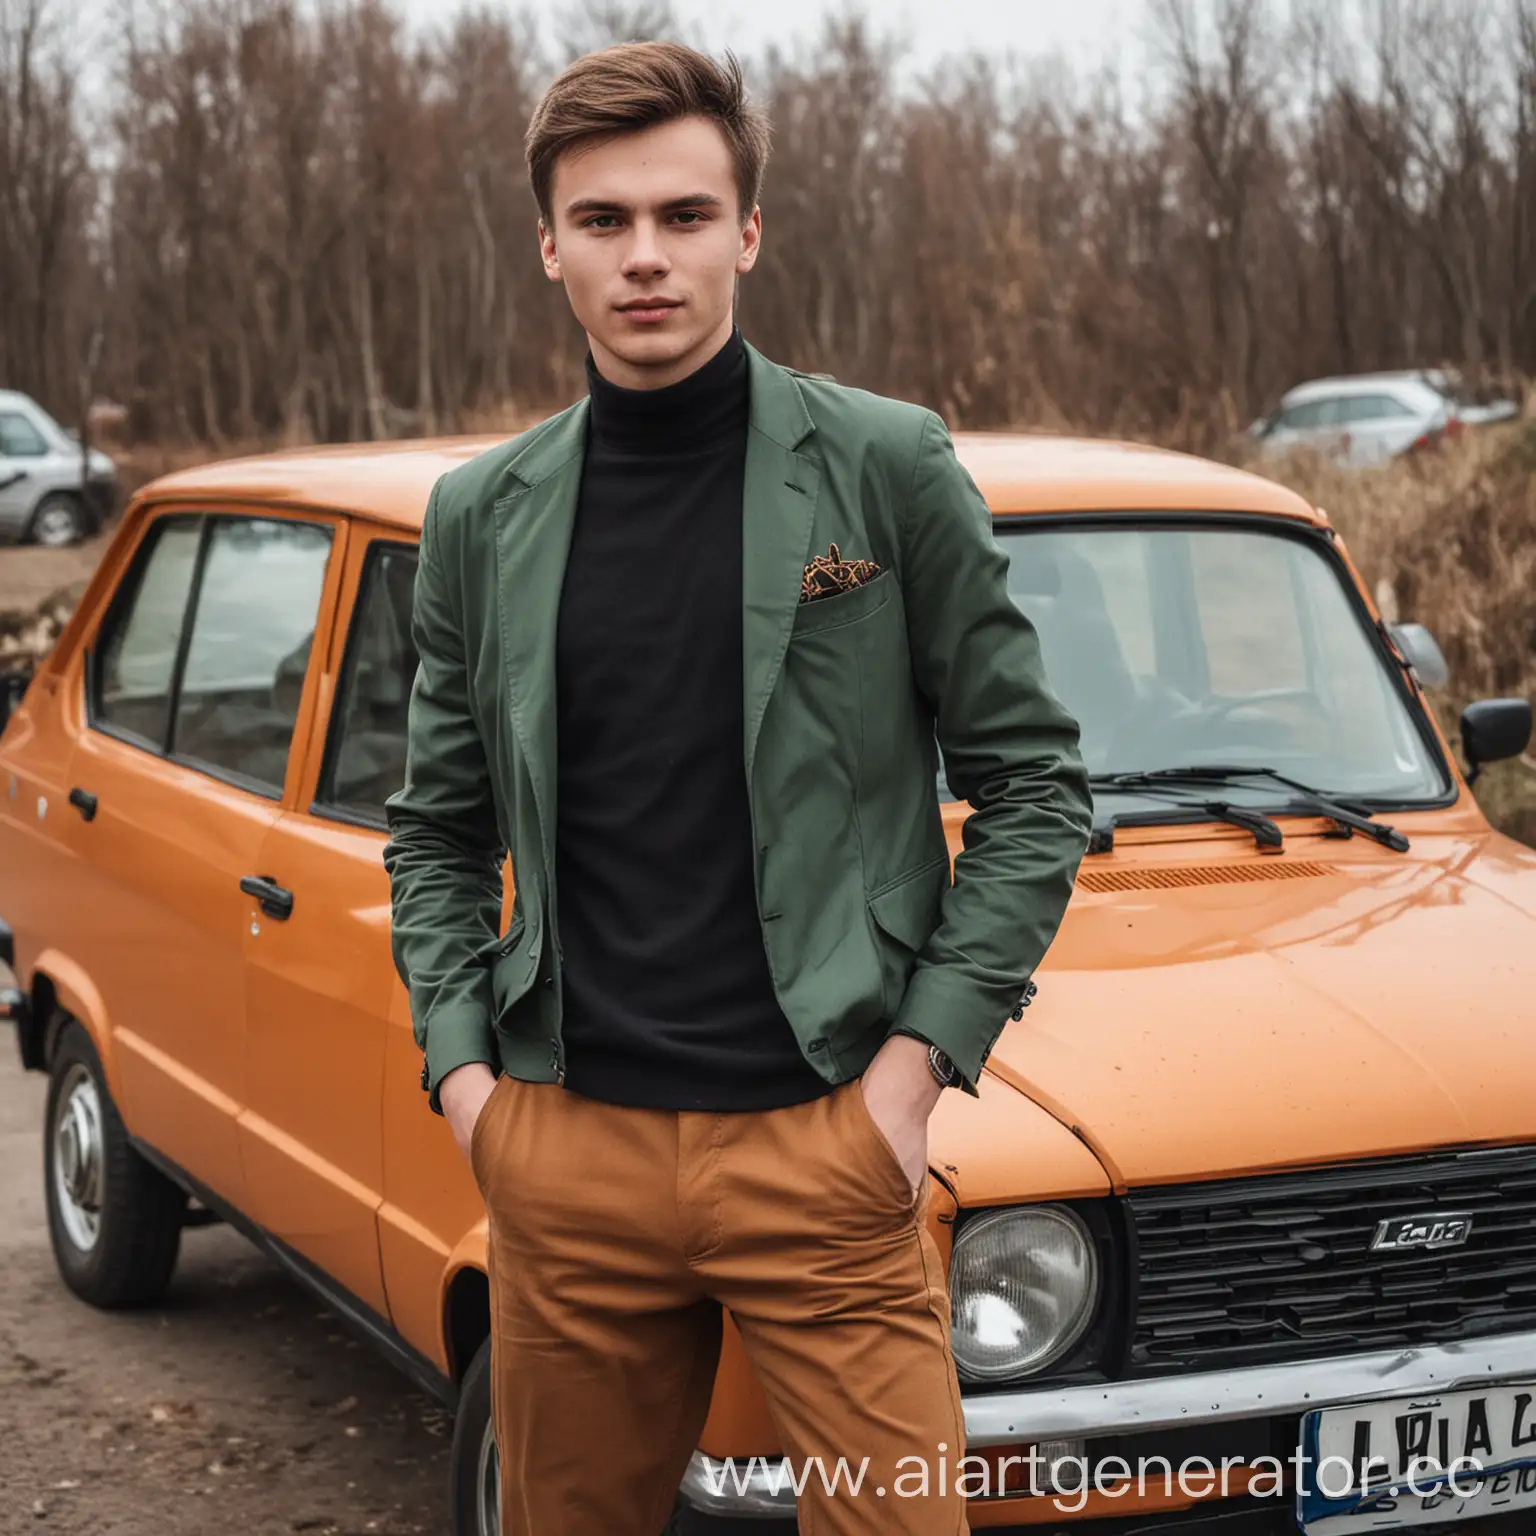 Stylish-Young-Man-with-Lada-Car-in-Fashionable-Setting